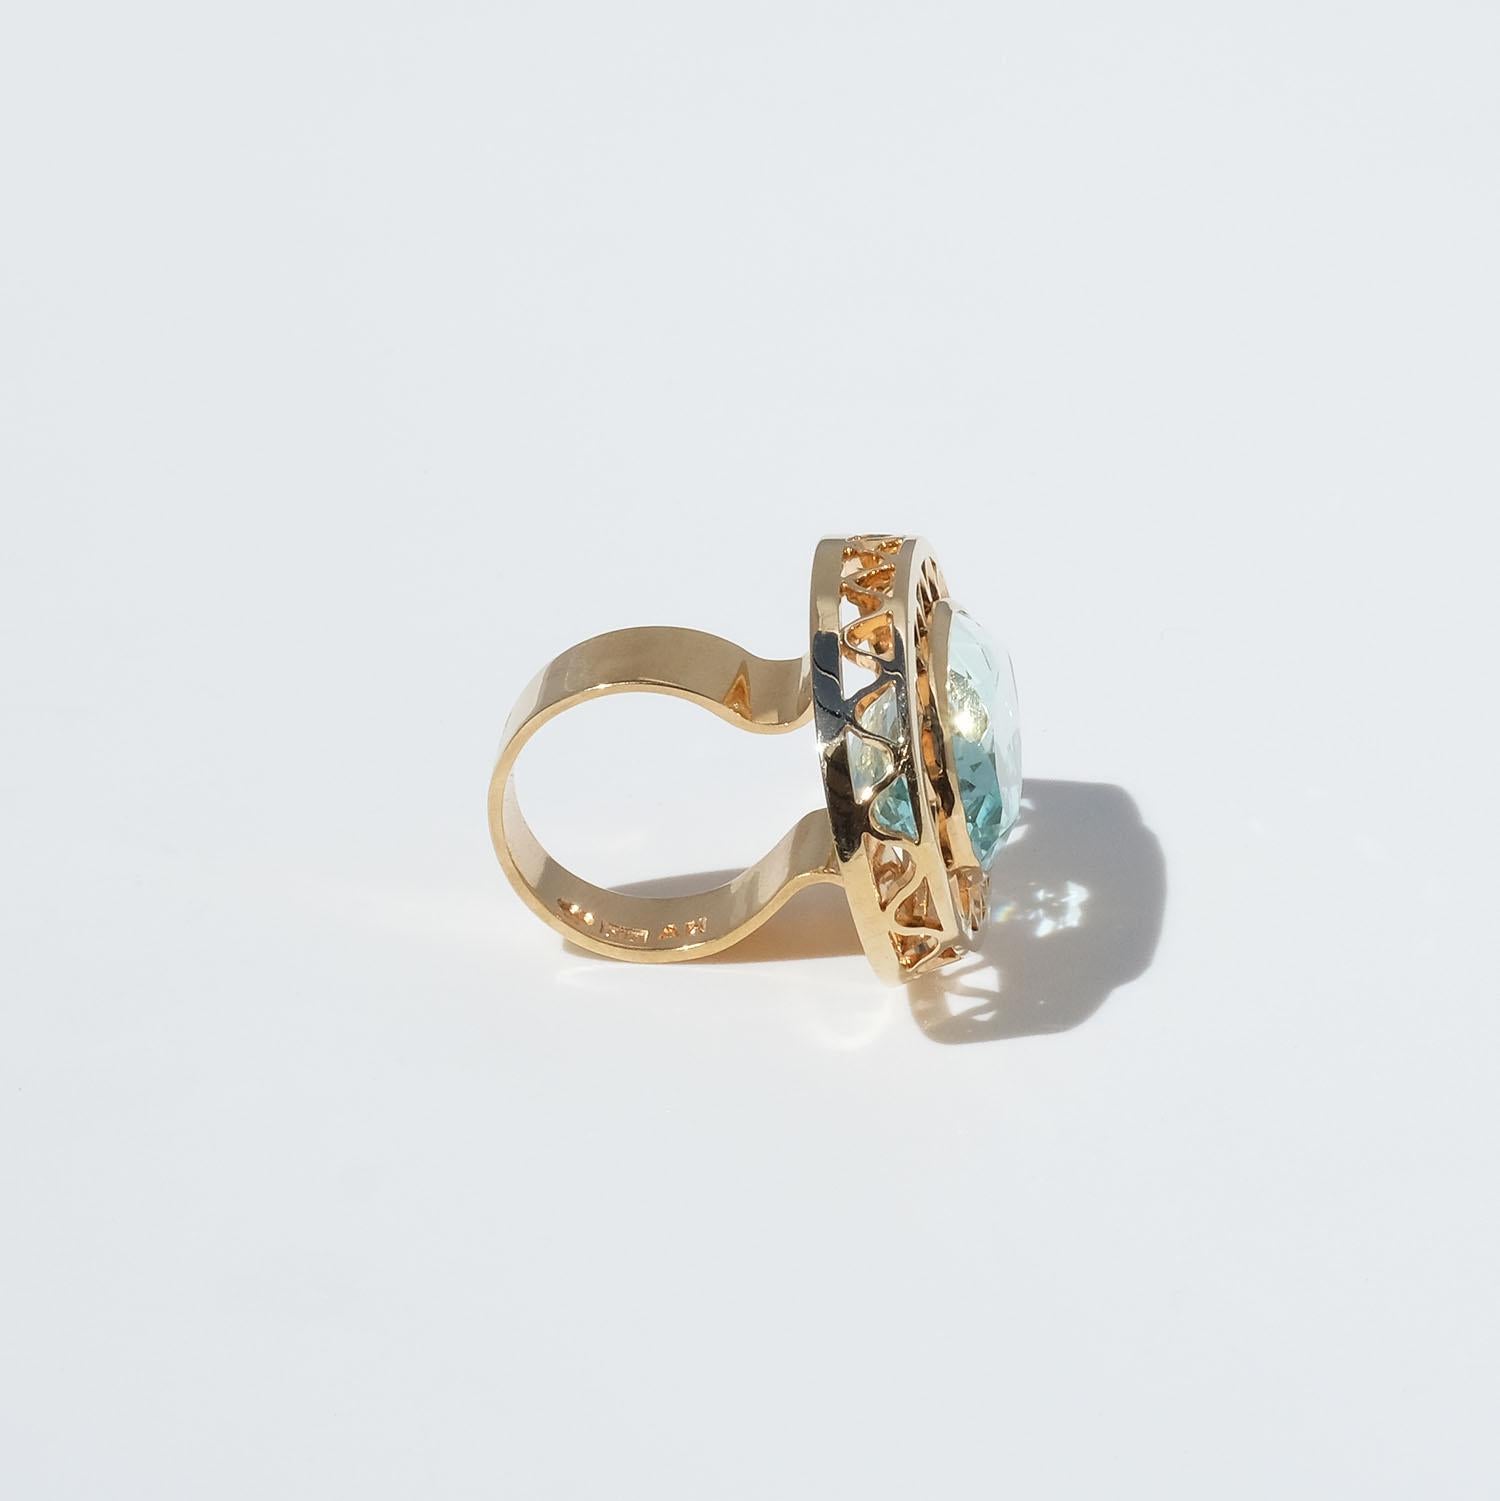 Vintage 18k Gold and Aquamarine Ring by Master Anders Högberg Year, 1977 For Sale 3